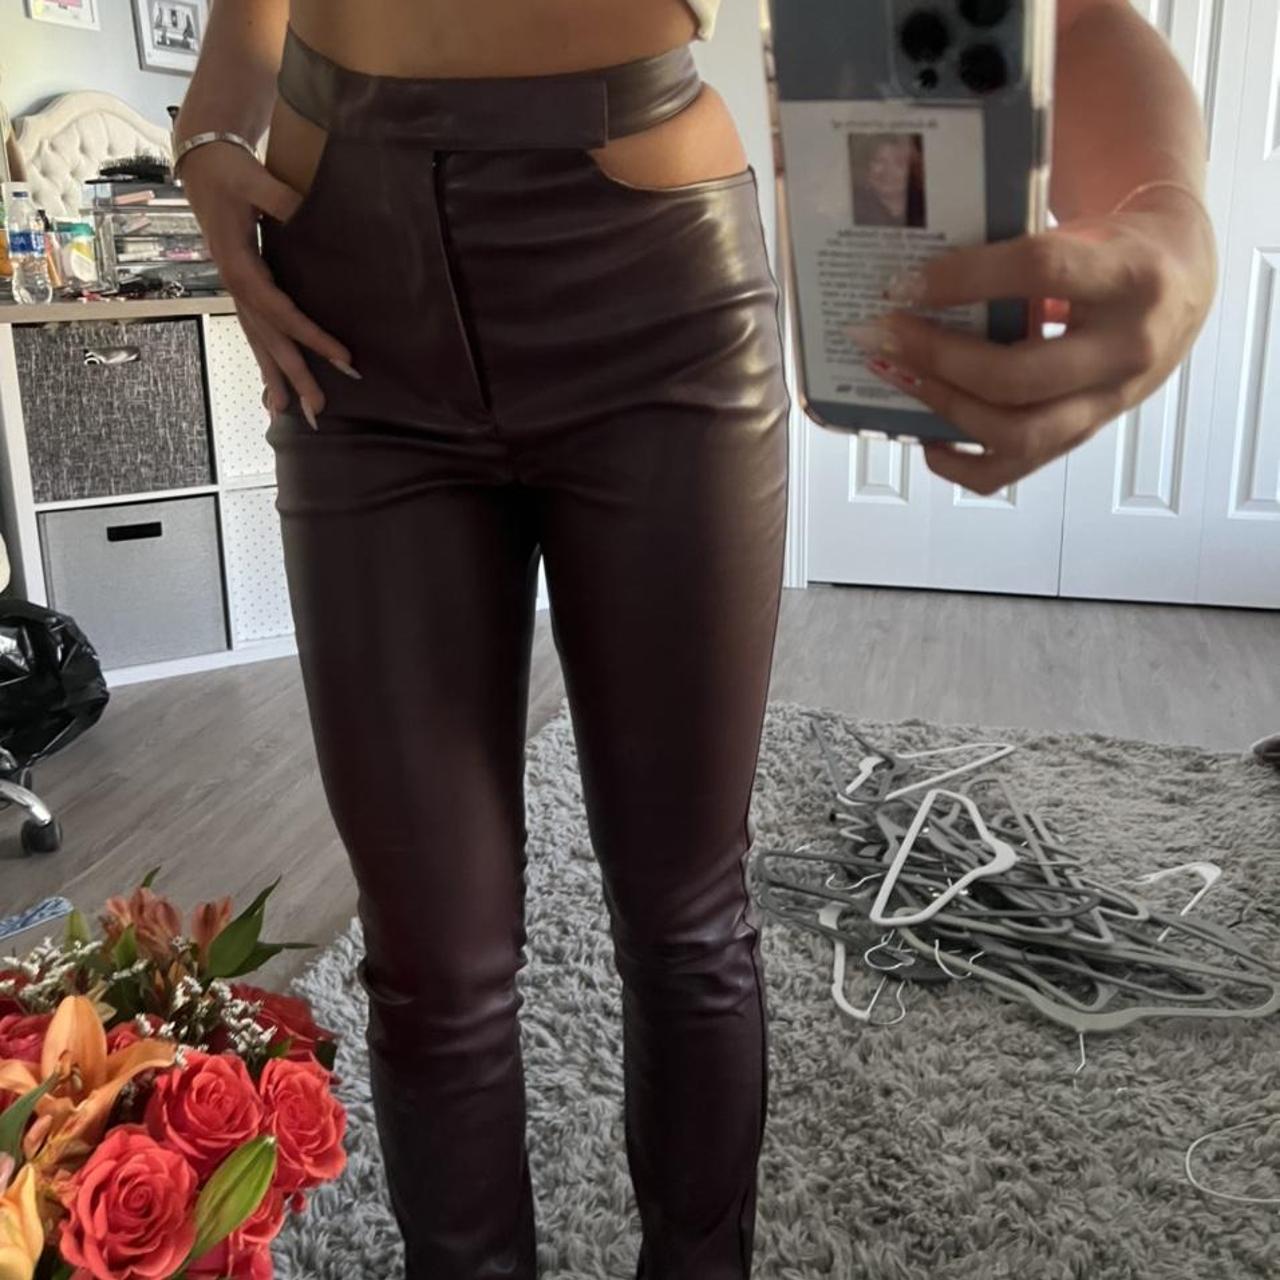 PrettyLittleThing Women's Brown and Burgundy Trousers | Depop